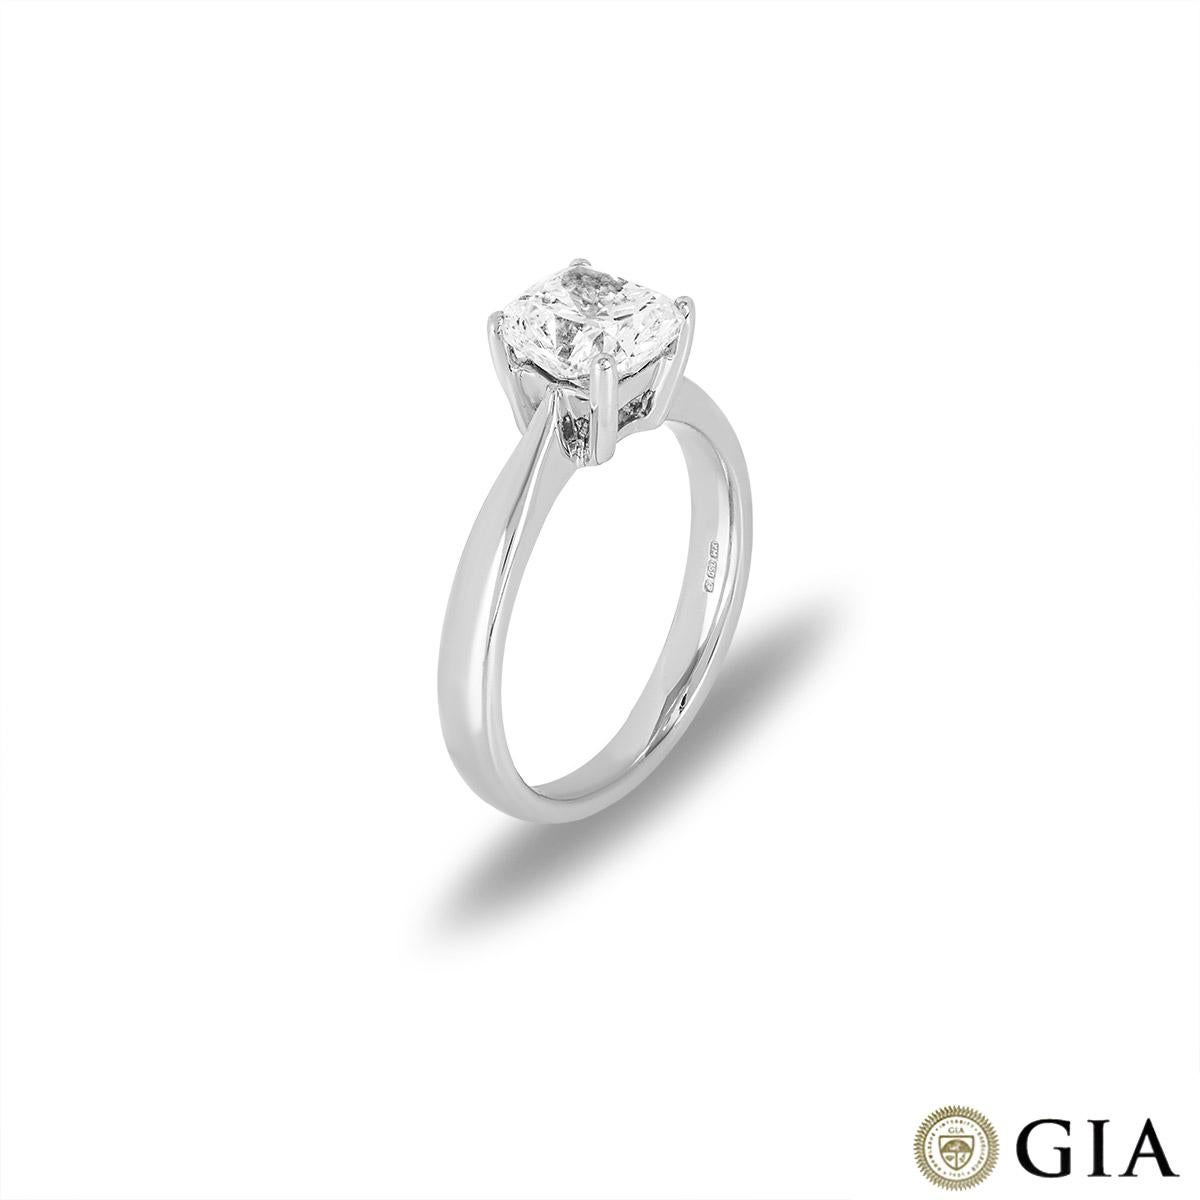 A beautiful 18k white gold diamond solitaire ring. The ring is set to the centre with a cushion modified brilliant cut diamond weighing 1.66ct, I colour and VS1 clarity. The 3mm white gold band tapers up into a classic four claw setting. The ring